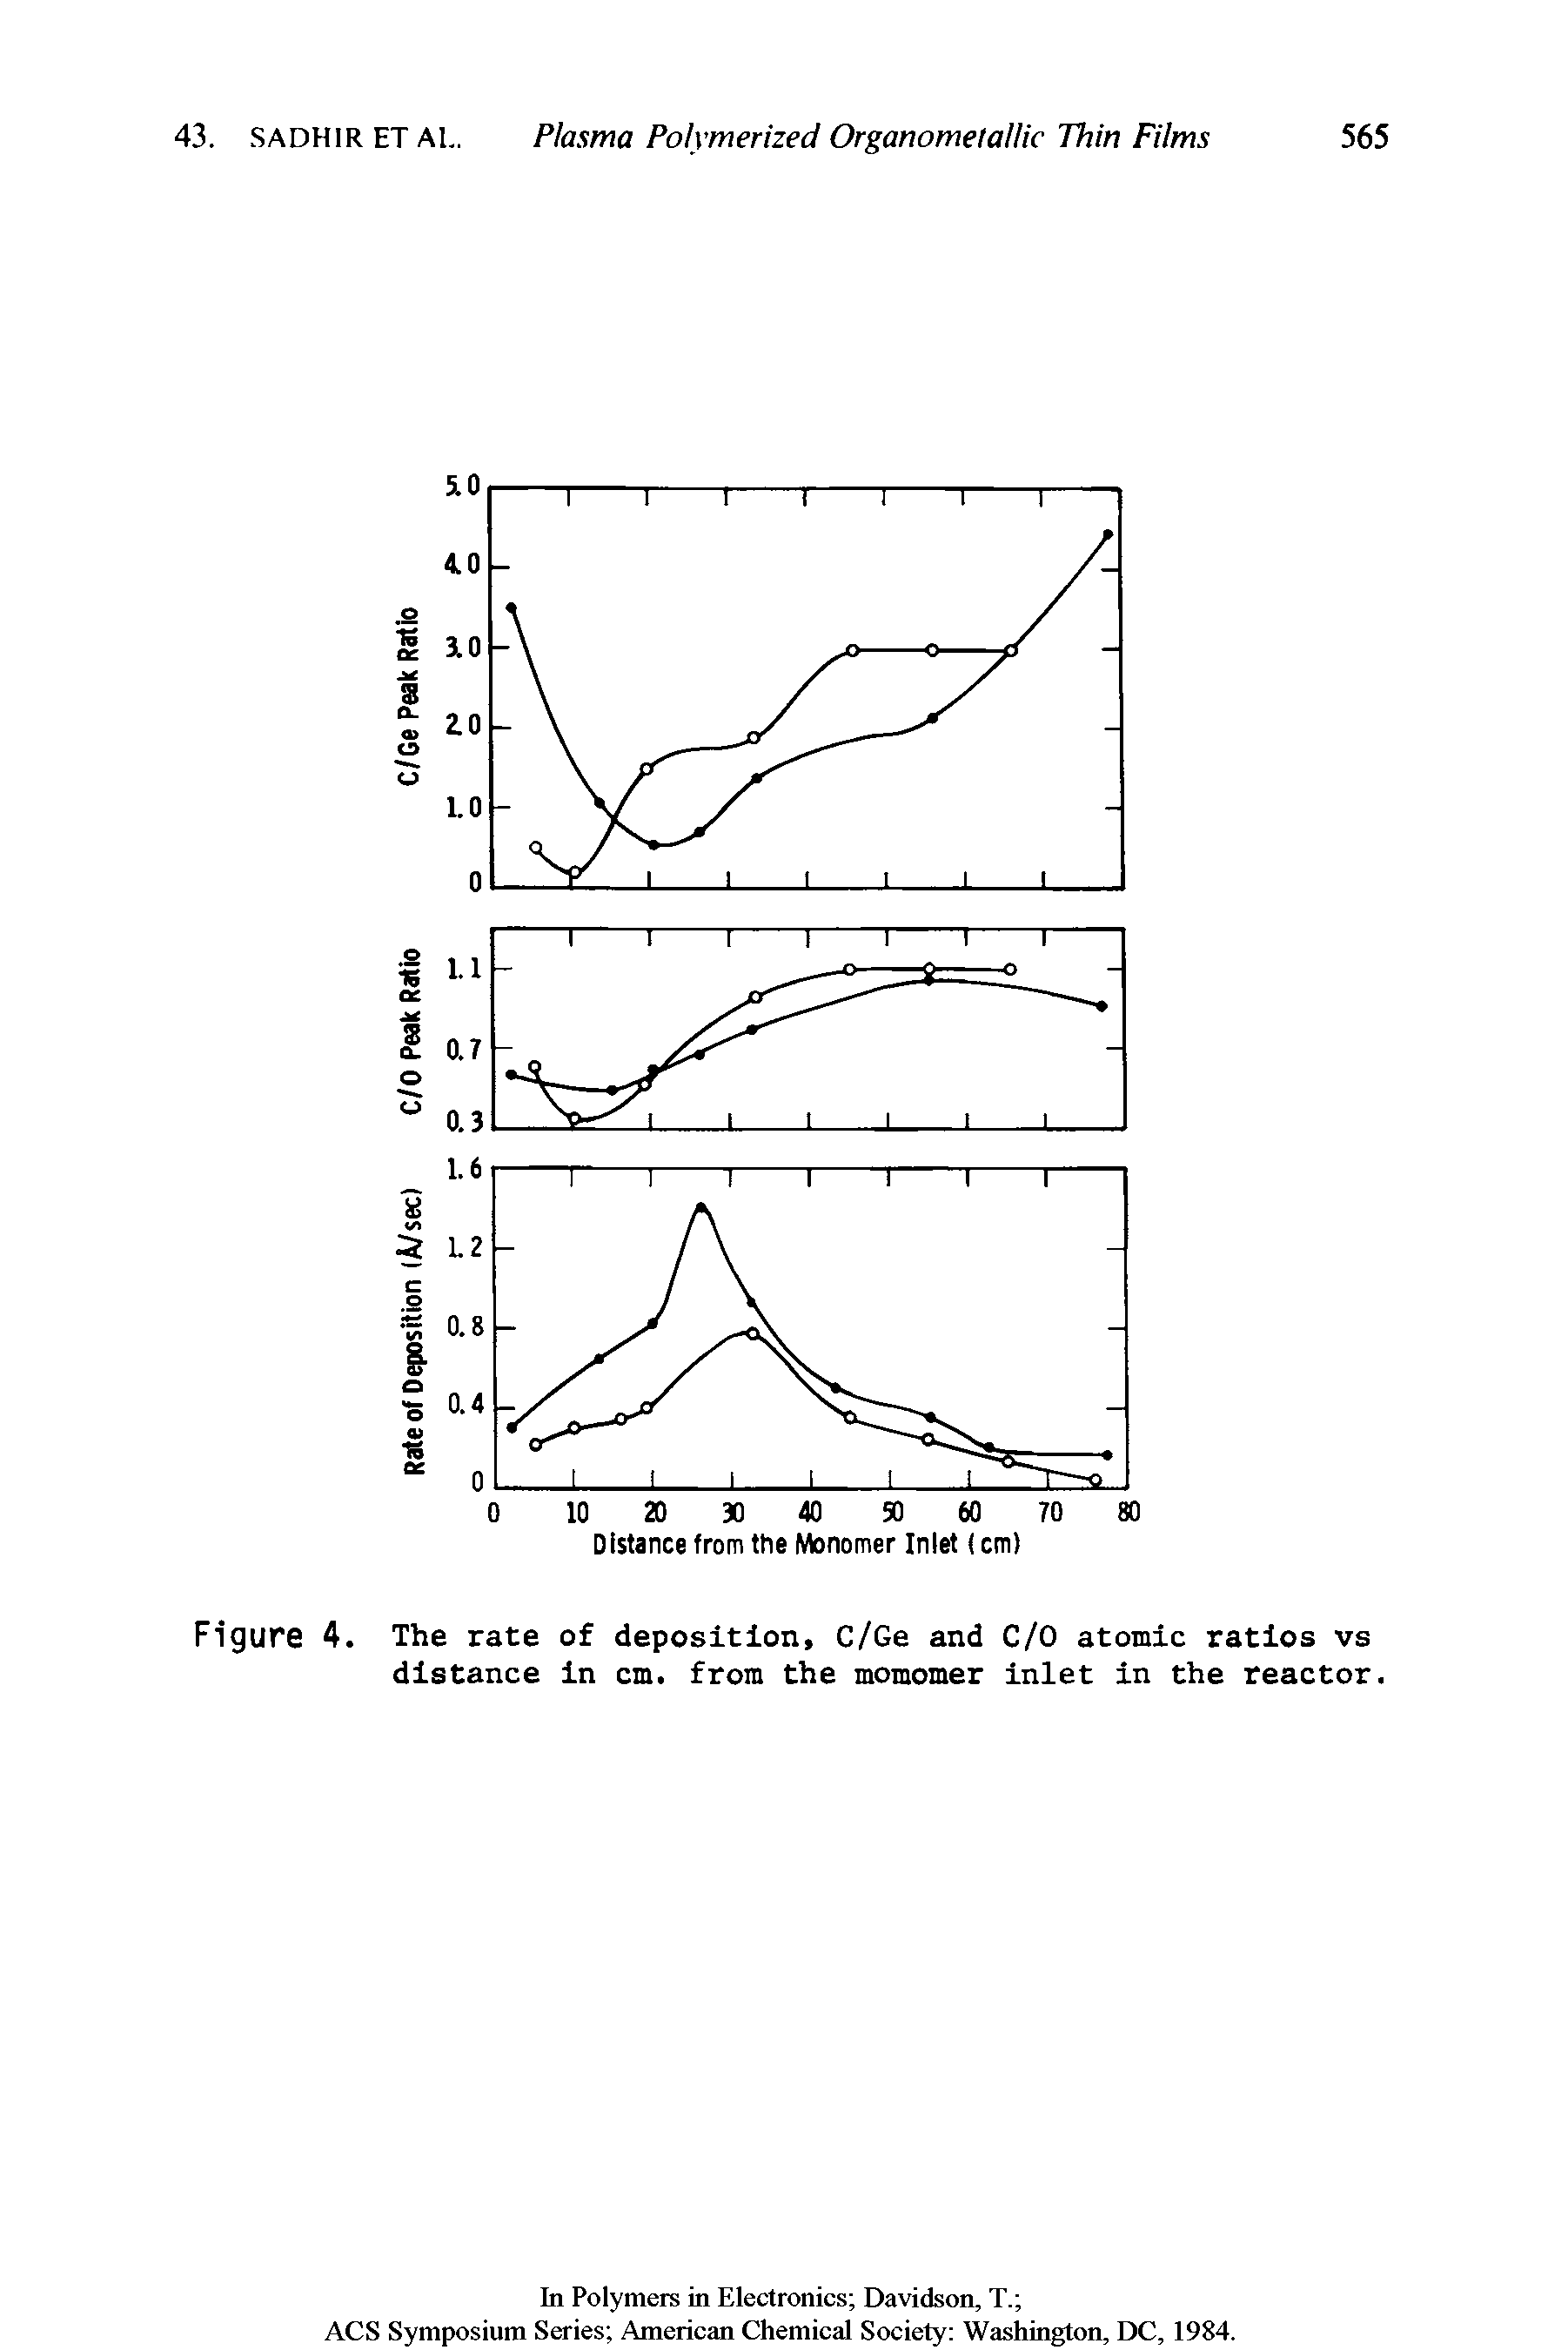 Figure 4. The rate of deposition, C/Ge and C/O atomic ratios vs distance in cm. from the momomer inlet in the reactor.